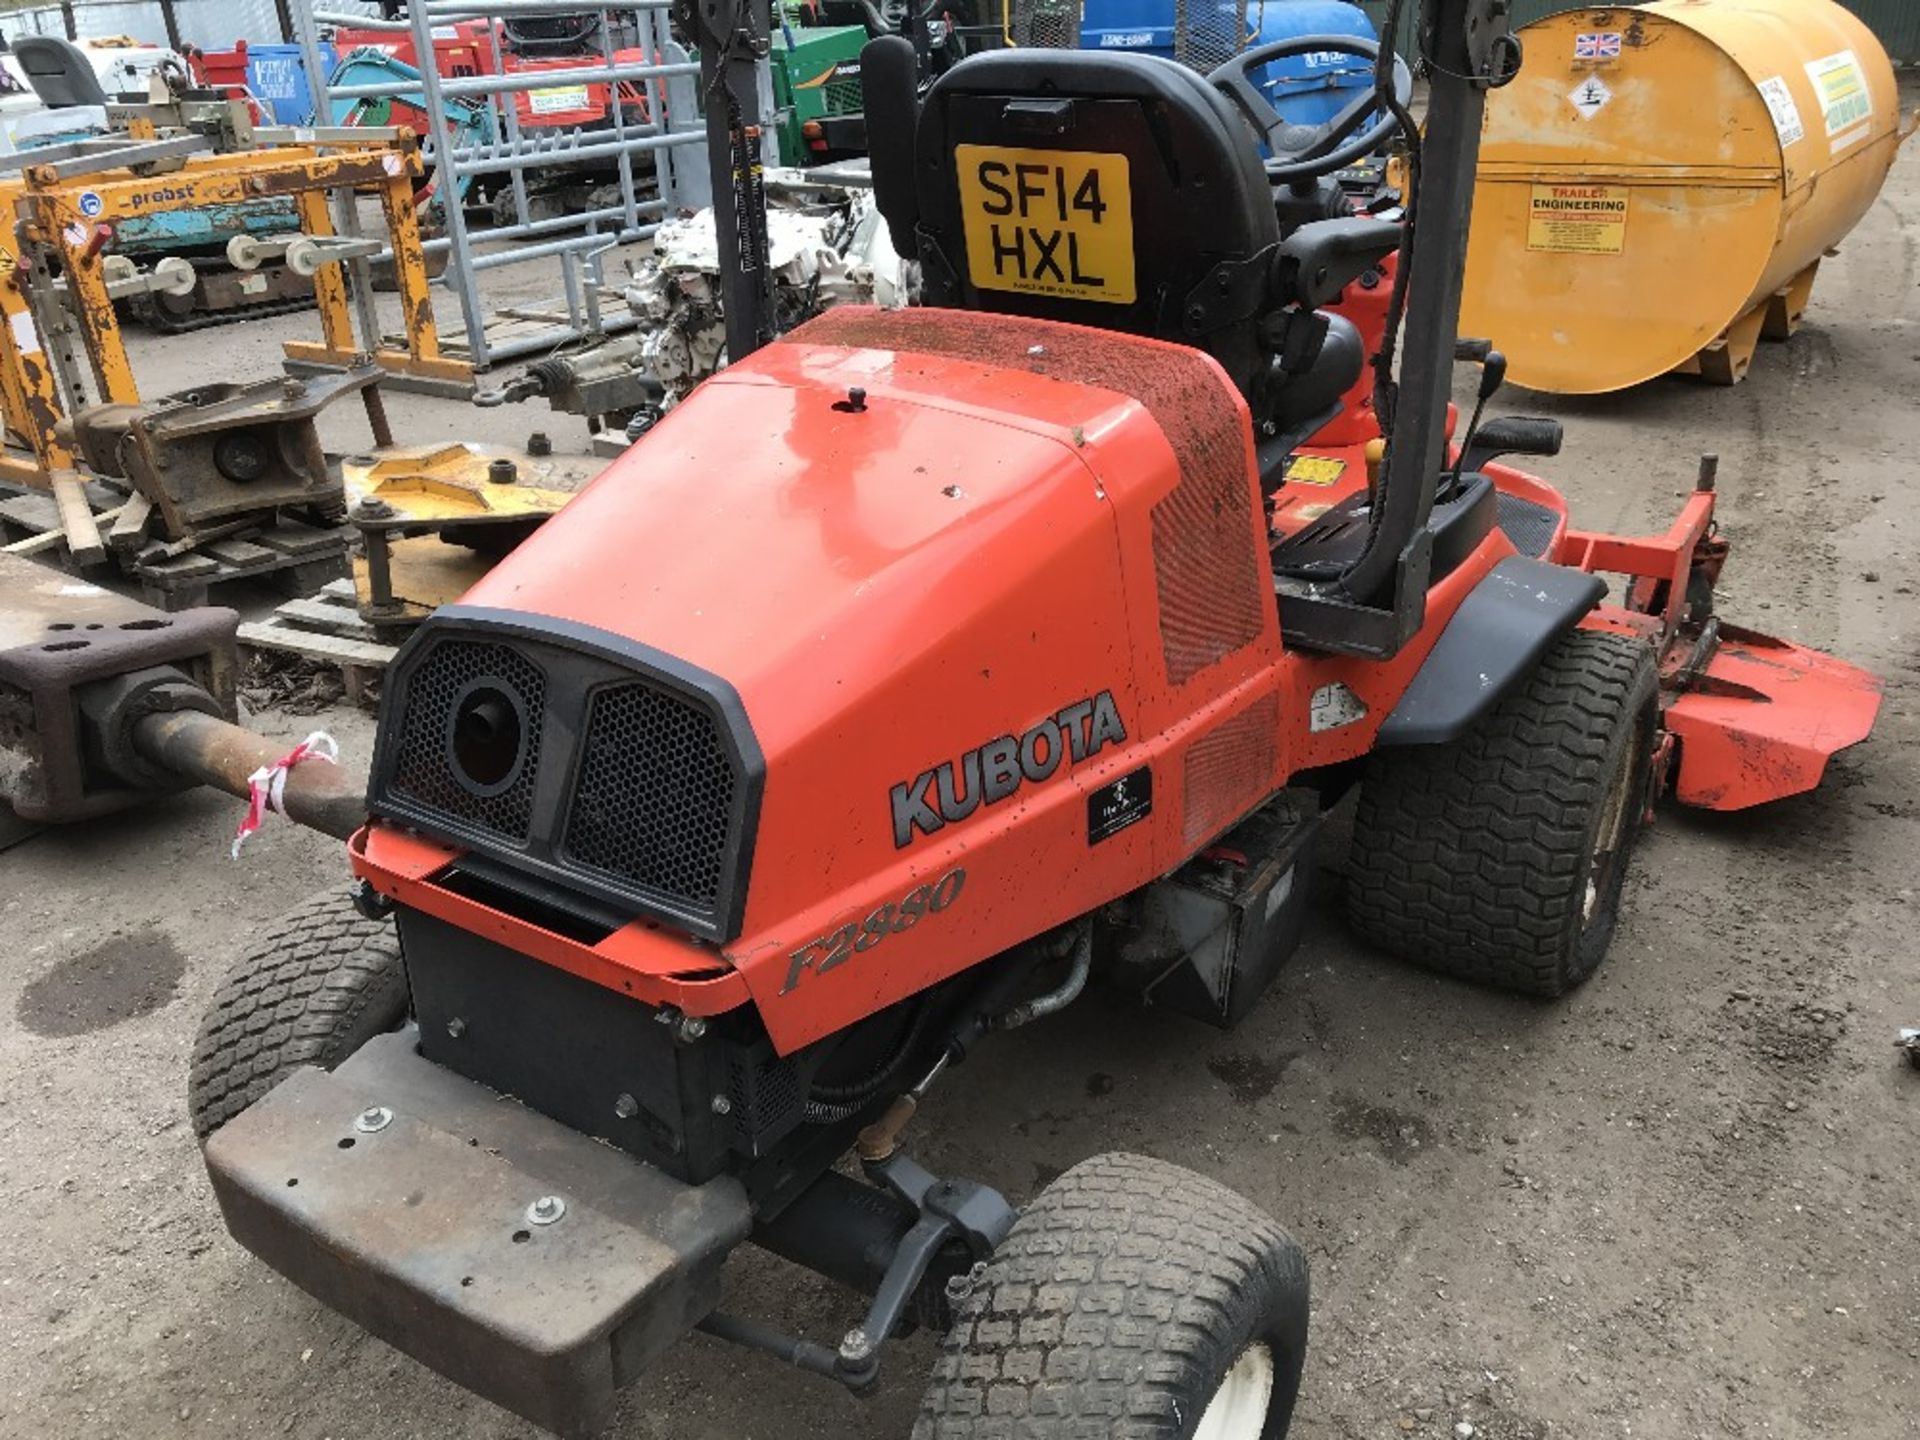 KUBOTA 2880 4WD OUTFRONT MOWER, 2160 REC.HRS. REG: SF14 HXL, V5 TO FOLLOW when tested was seen to - Image 5 of 5